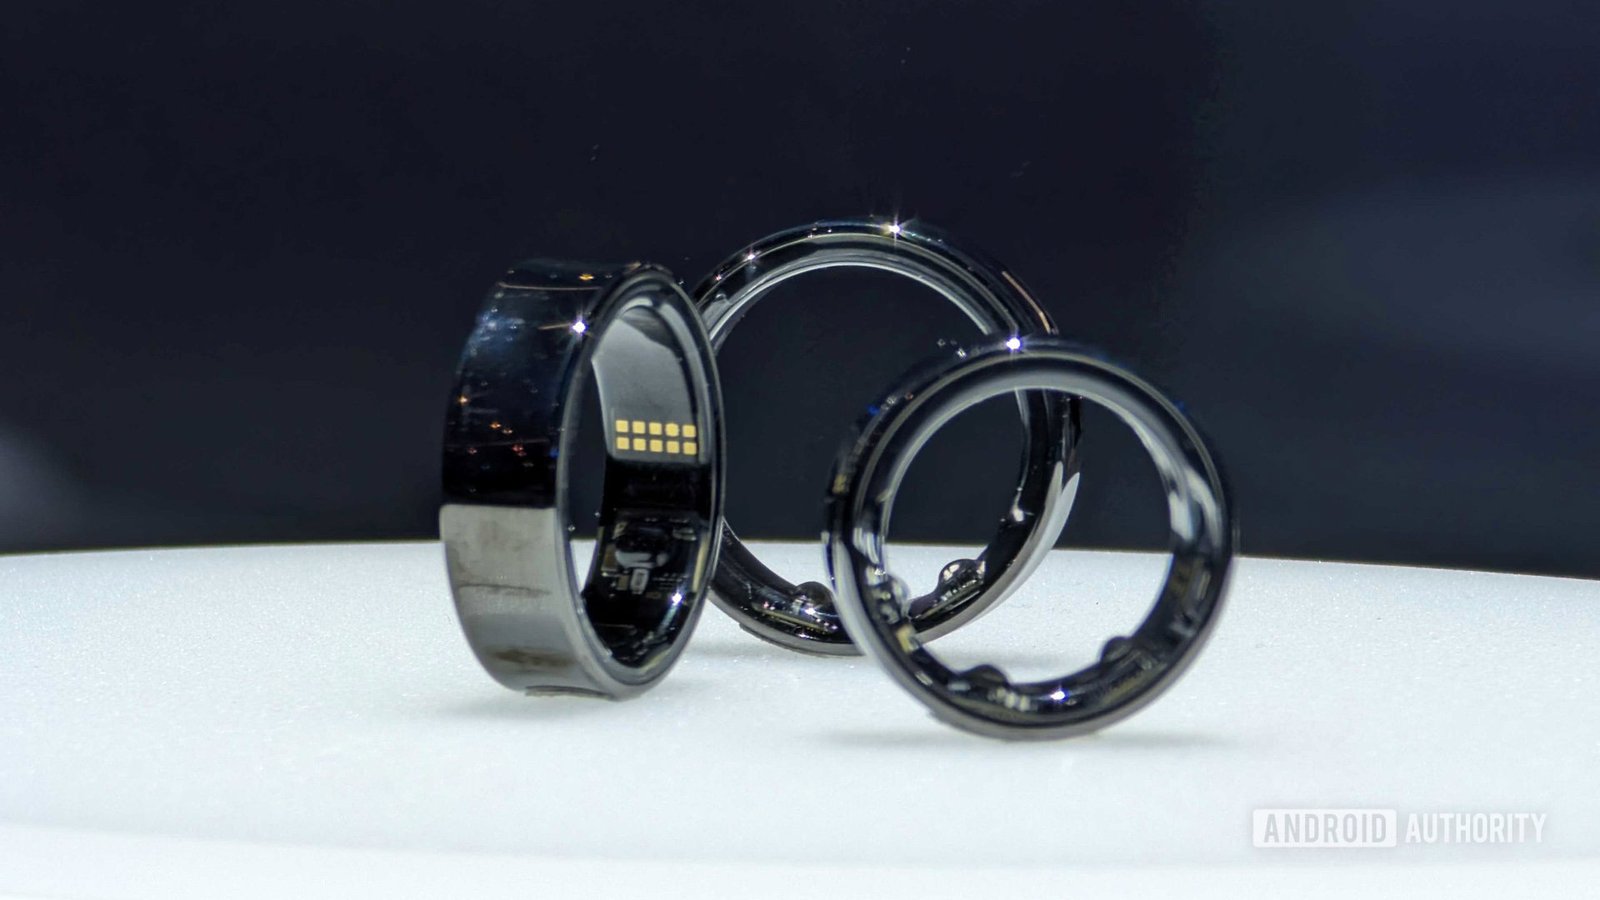 Galaxy Ring could have a ‘Lost mode’ to make sure you can find it (APK teardown)